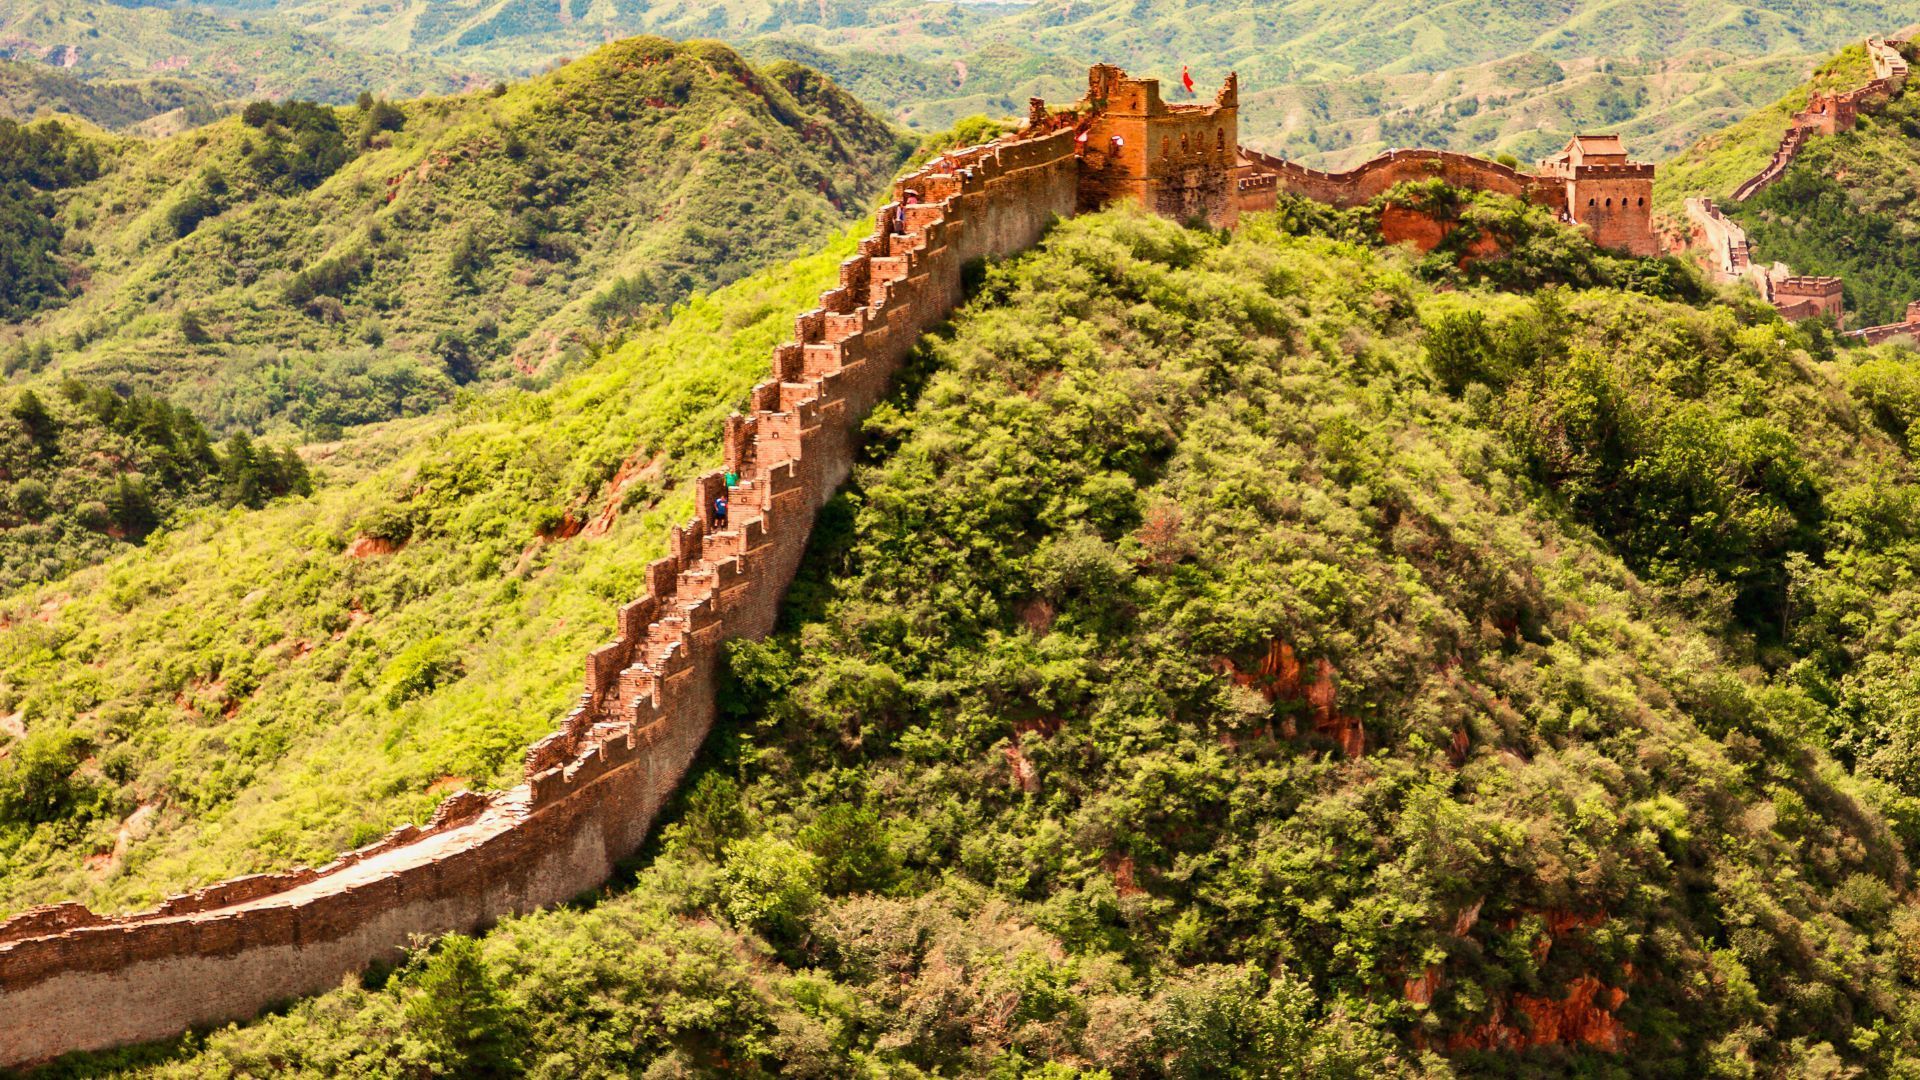 The Great Wall of China: Facts, History, Sections, Travel Tips & Tours